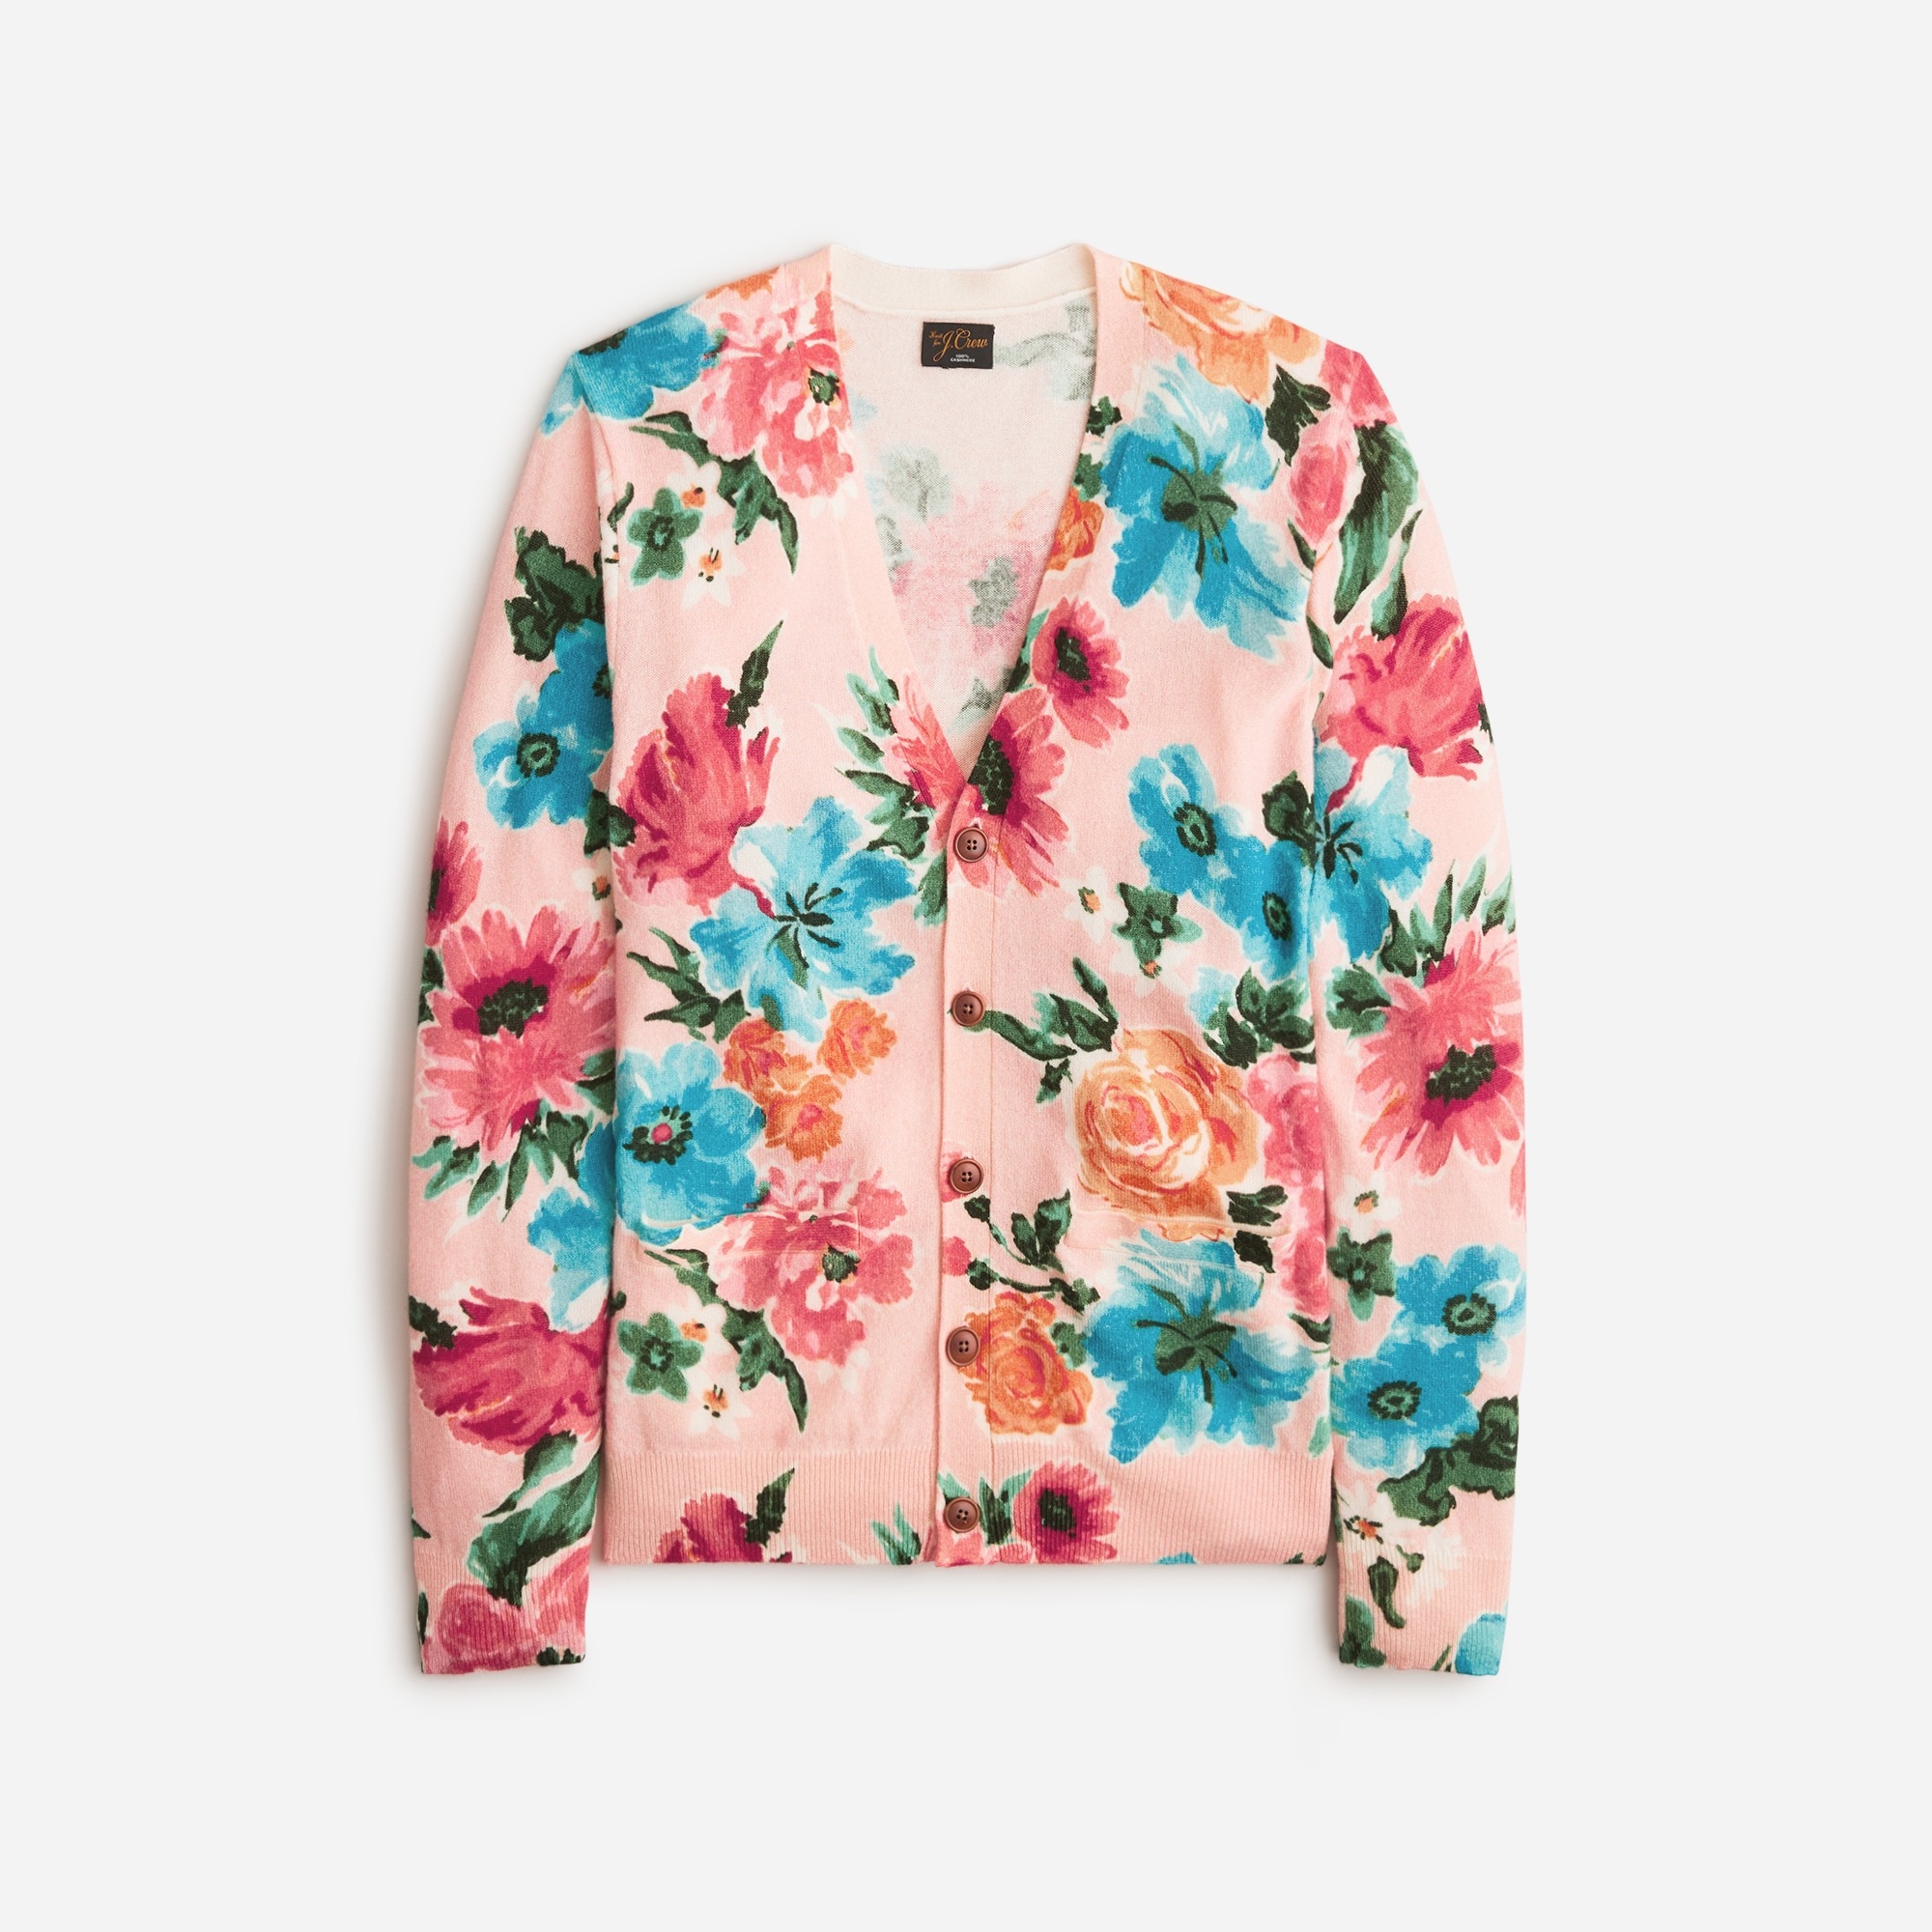  Cashmere cardigan sweater in floral print